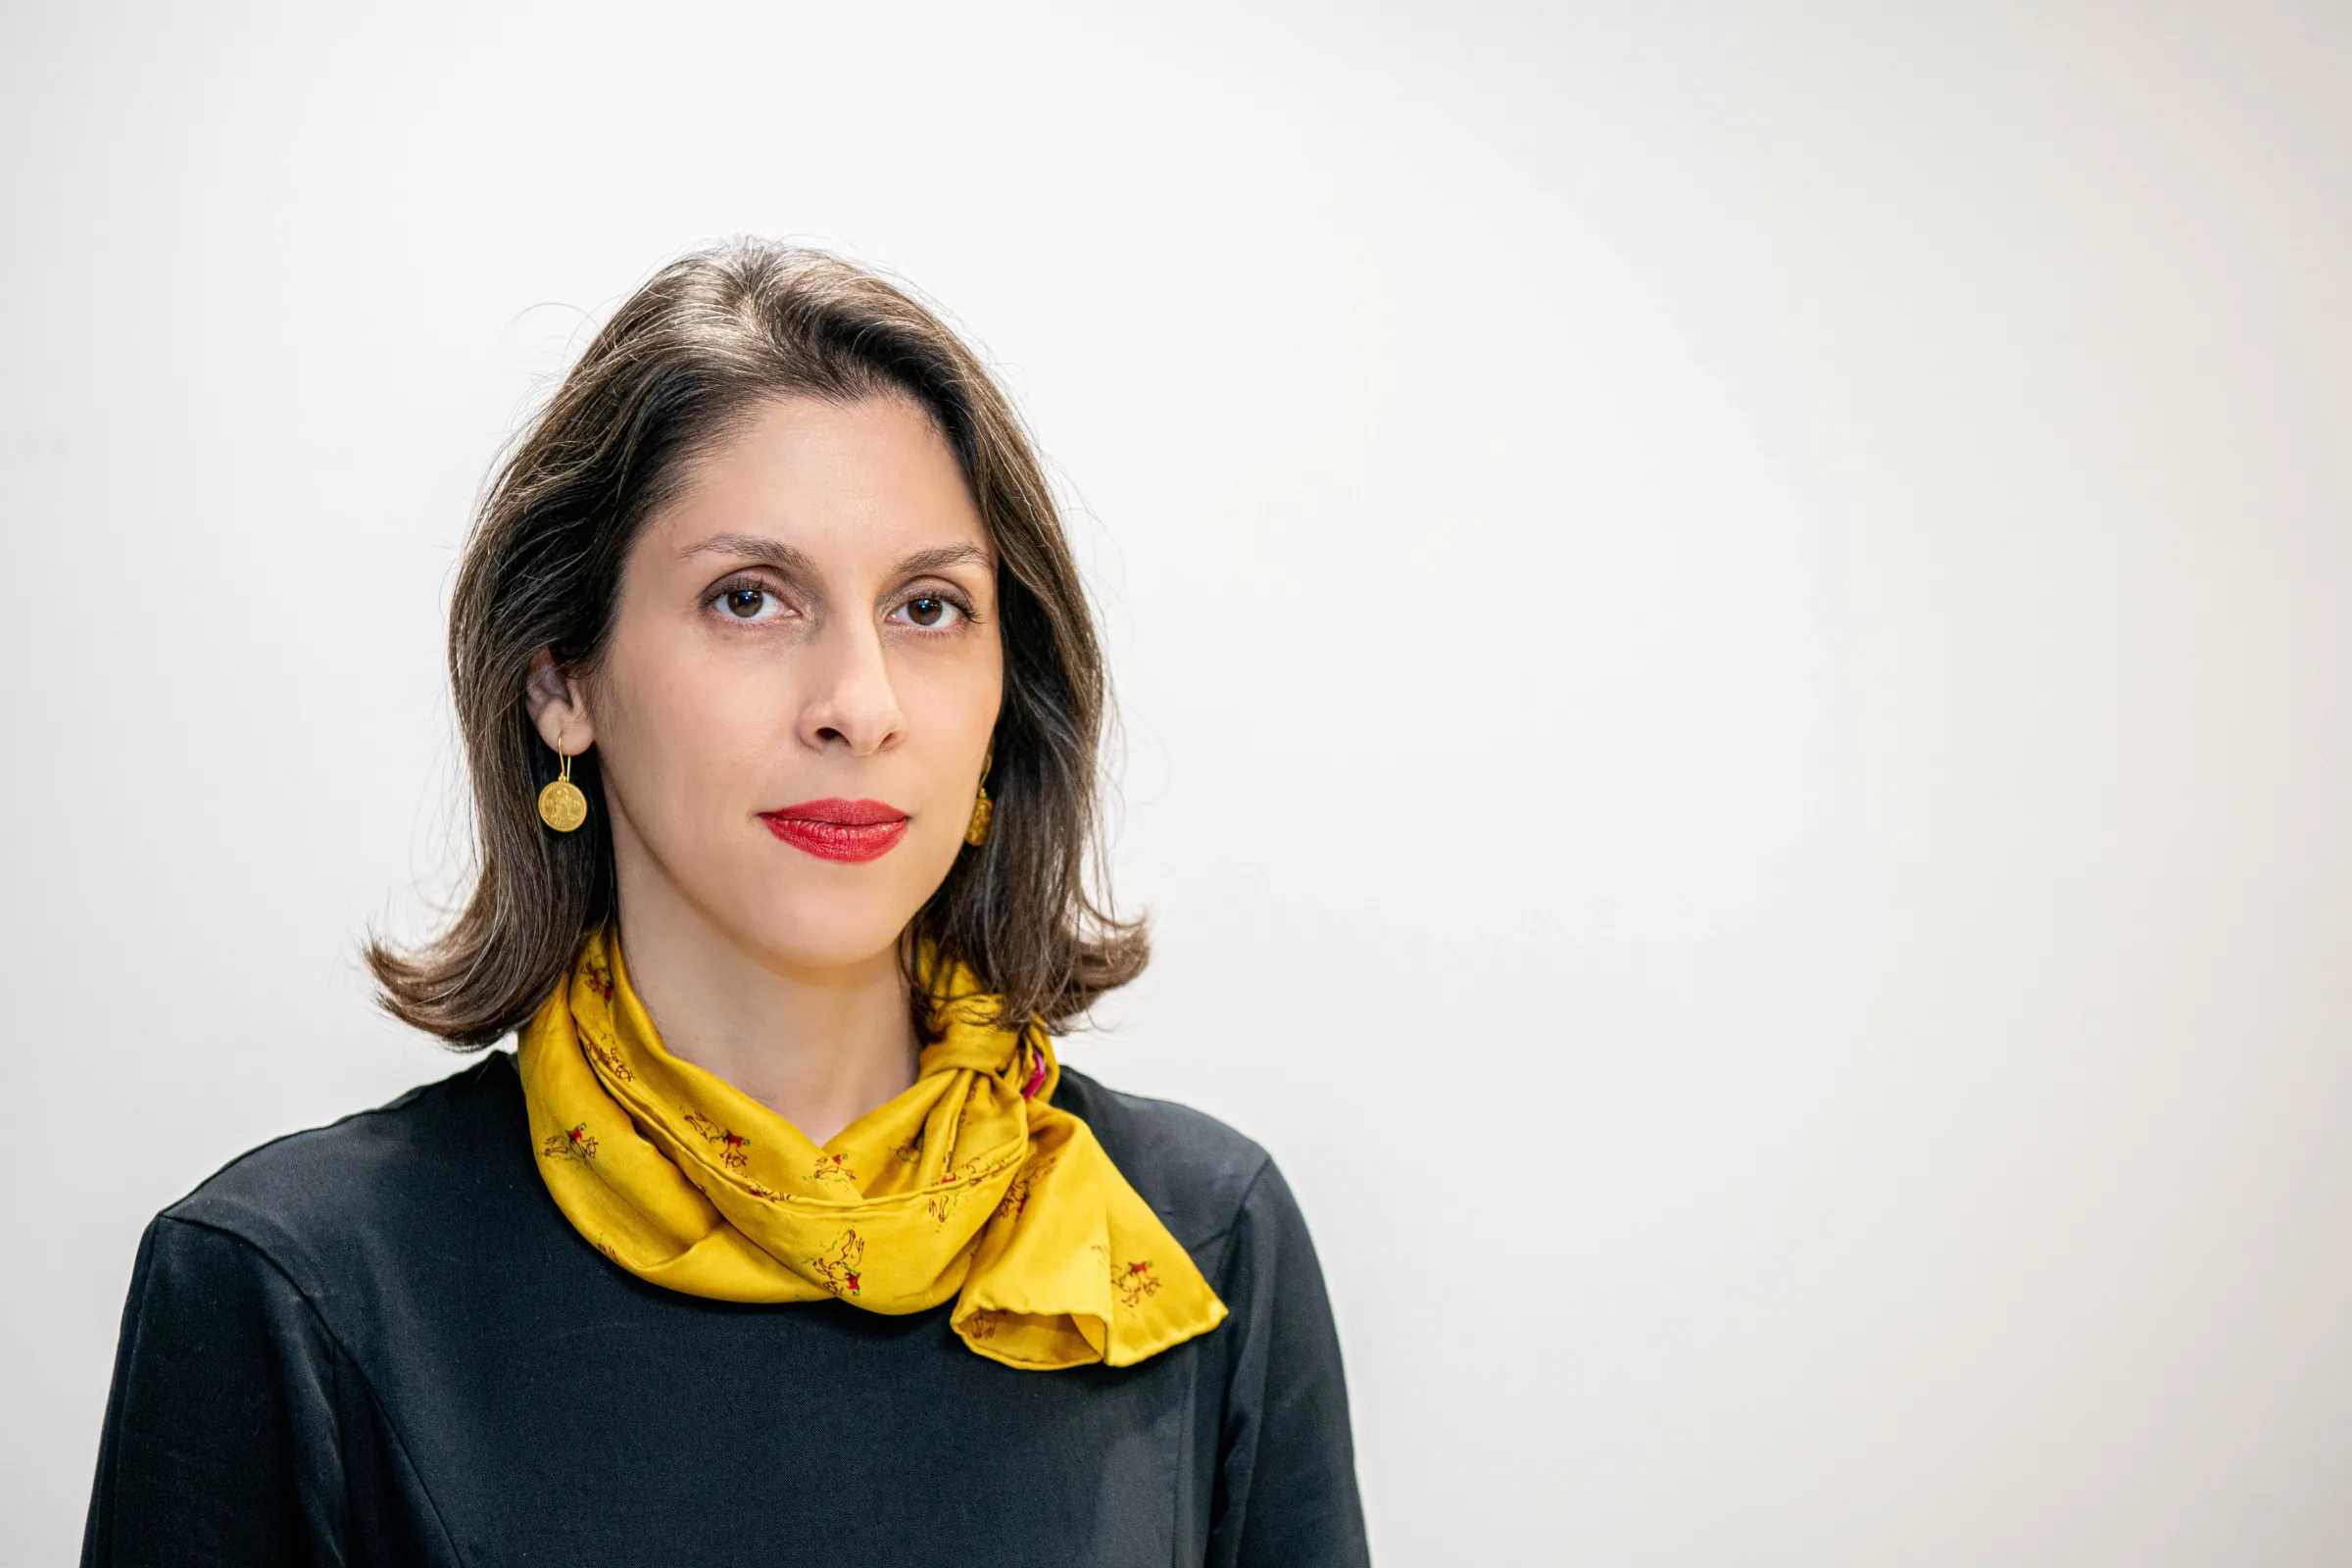 British-Iranian charity worker Nazanin Zaghari-Ratcliffe poses for a portrait at the Thomson Reuters Foundation's annual Trust Conference in London, United Kingdom, October 26, 2022. Thomson Reuters Foundation/Ed Telling